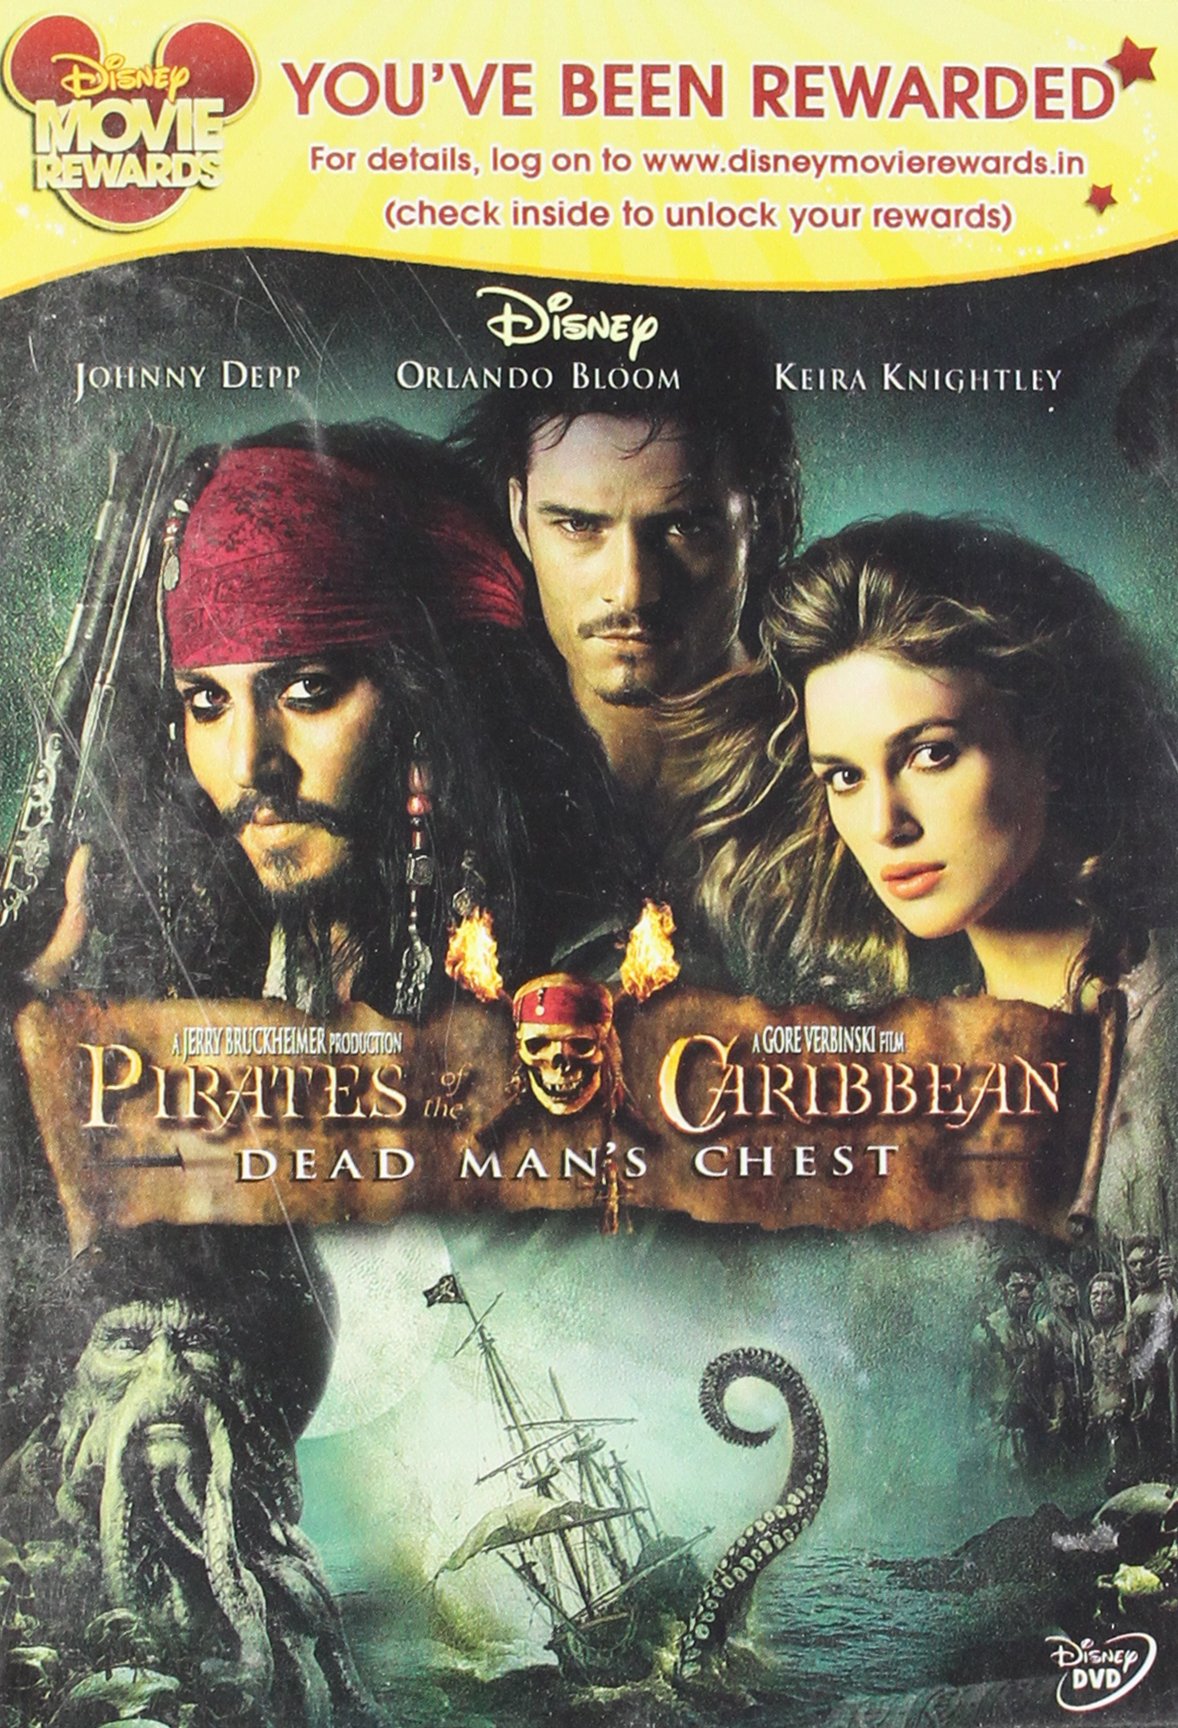 pirates-of-the-caribbean-2-dead-mans-chest-movie-purchase-or-watch